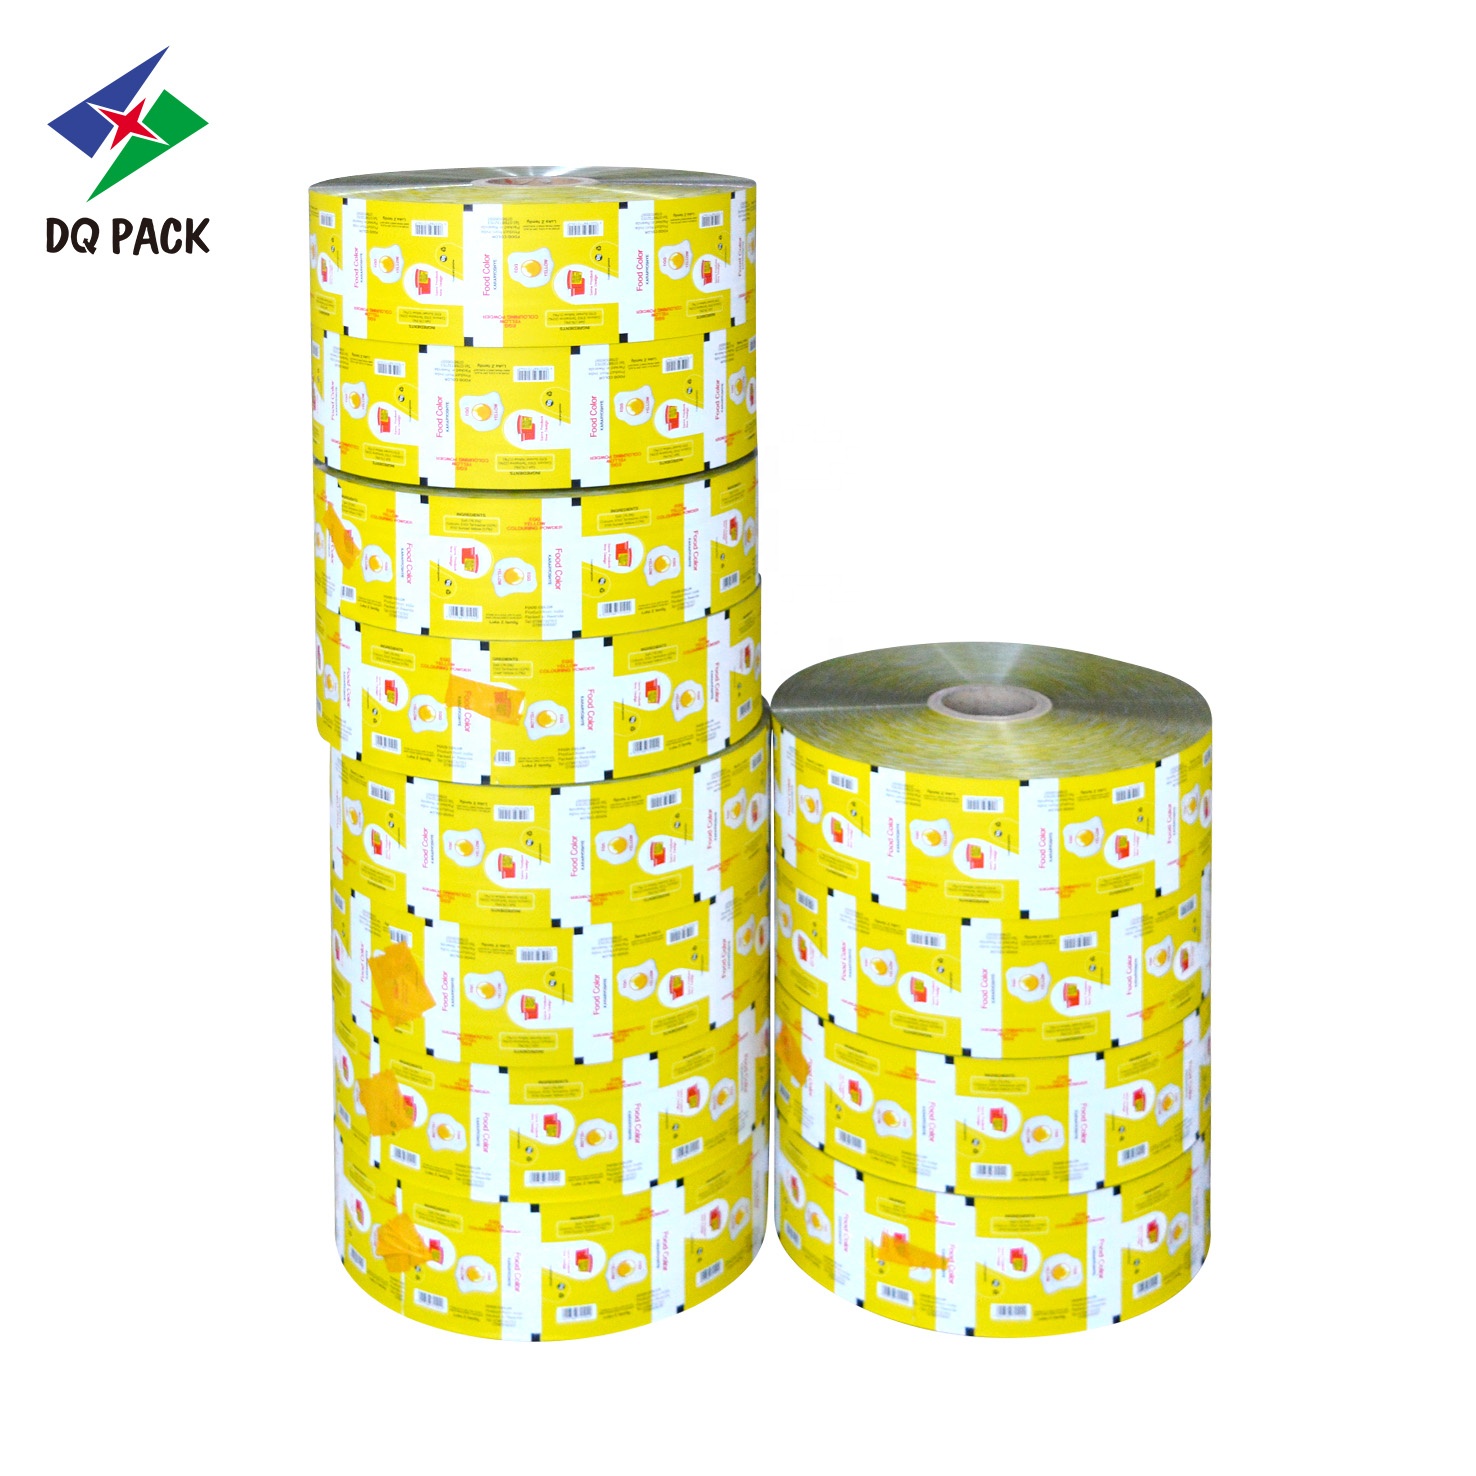 DQ PACK Custom Printed automatic packaging roll stock film for Moyaonnaise sauce food packing